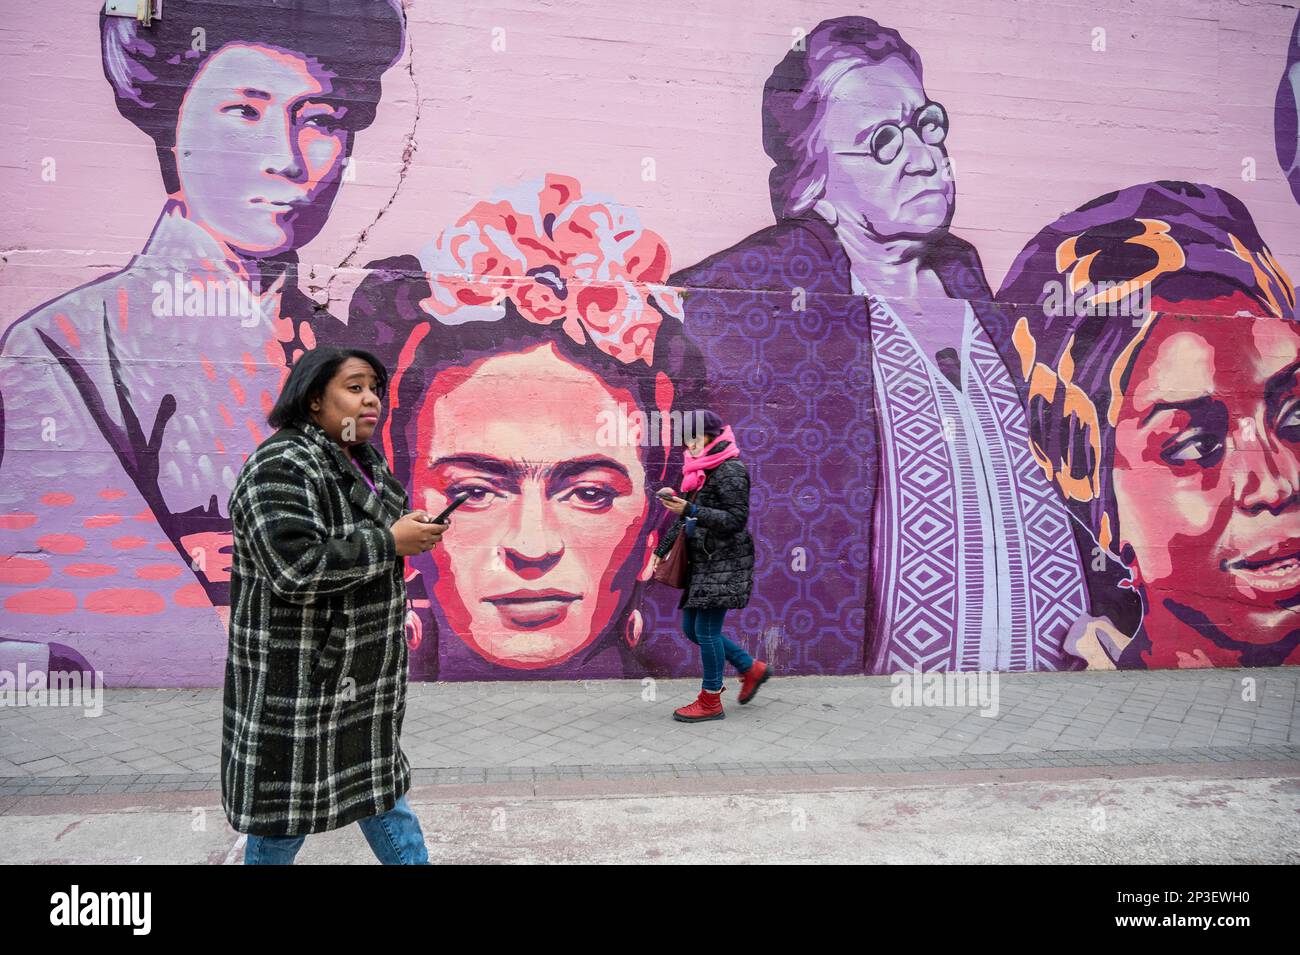 Madrid, Spain. 05th Mar, 2023. Women walk past a feminist mural ahead of a performance of a human chain to denounce violence against women and make visible the feminist struggle as part of the activities for International Women's Day. In the mural appear the faces of 15 women who are part of history for their fight in favor of equality such as Angela Davis, Frida Kahlo, Nina Simone, among others. Credit: Marcos del Mazo/Alamy Live News Stock Photo